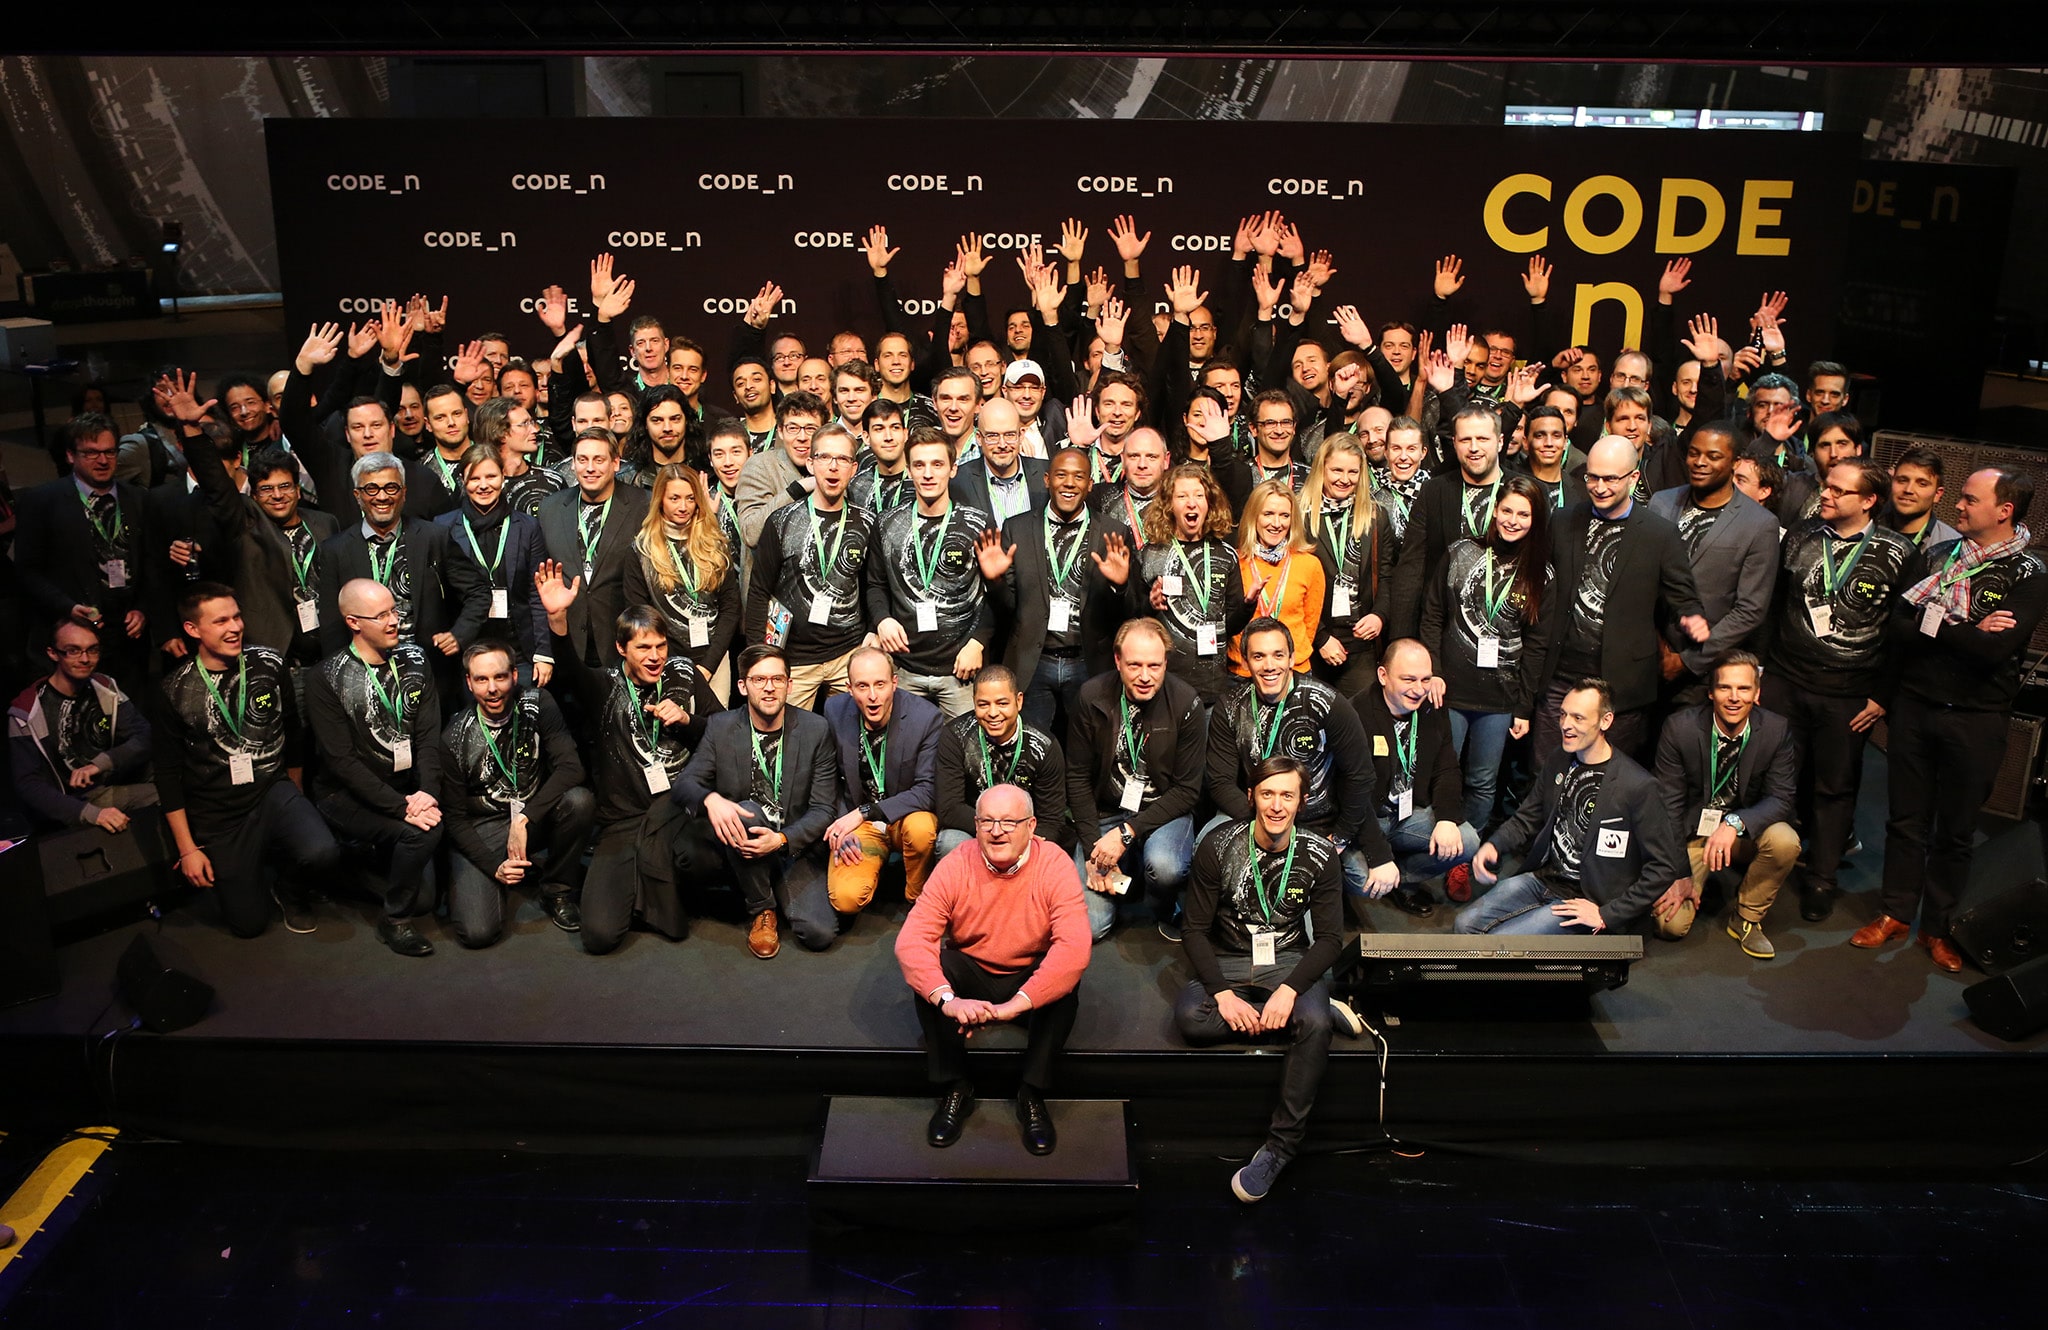 CODE_n Startup CONTEST 2014 Finalists